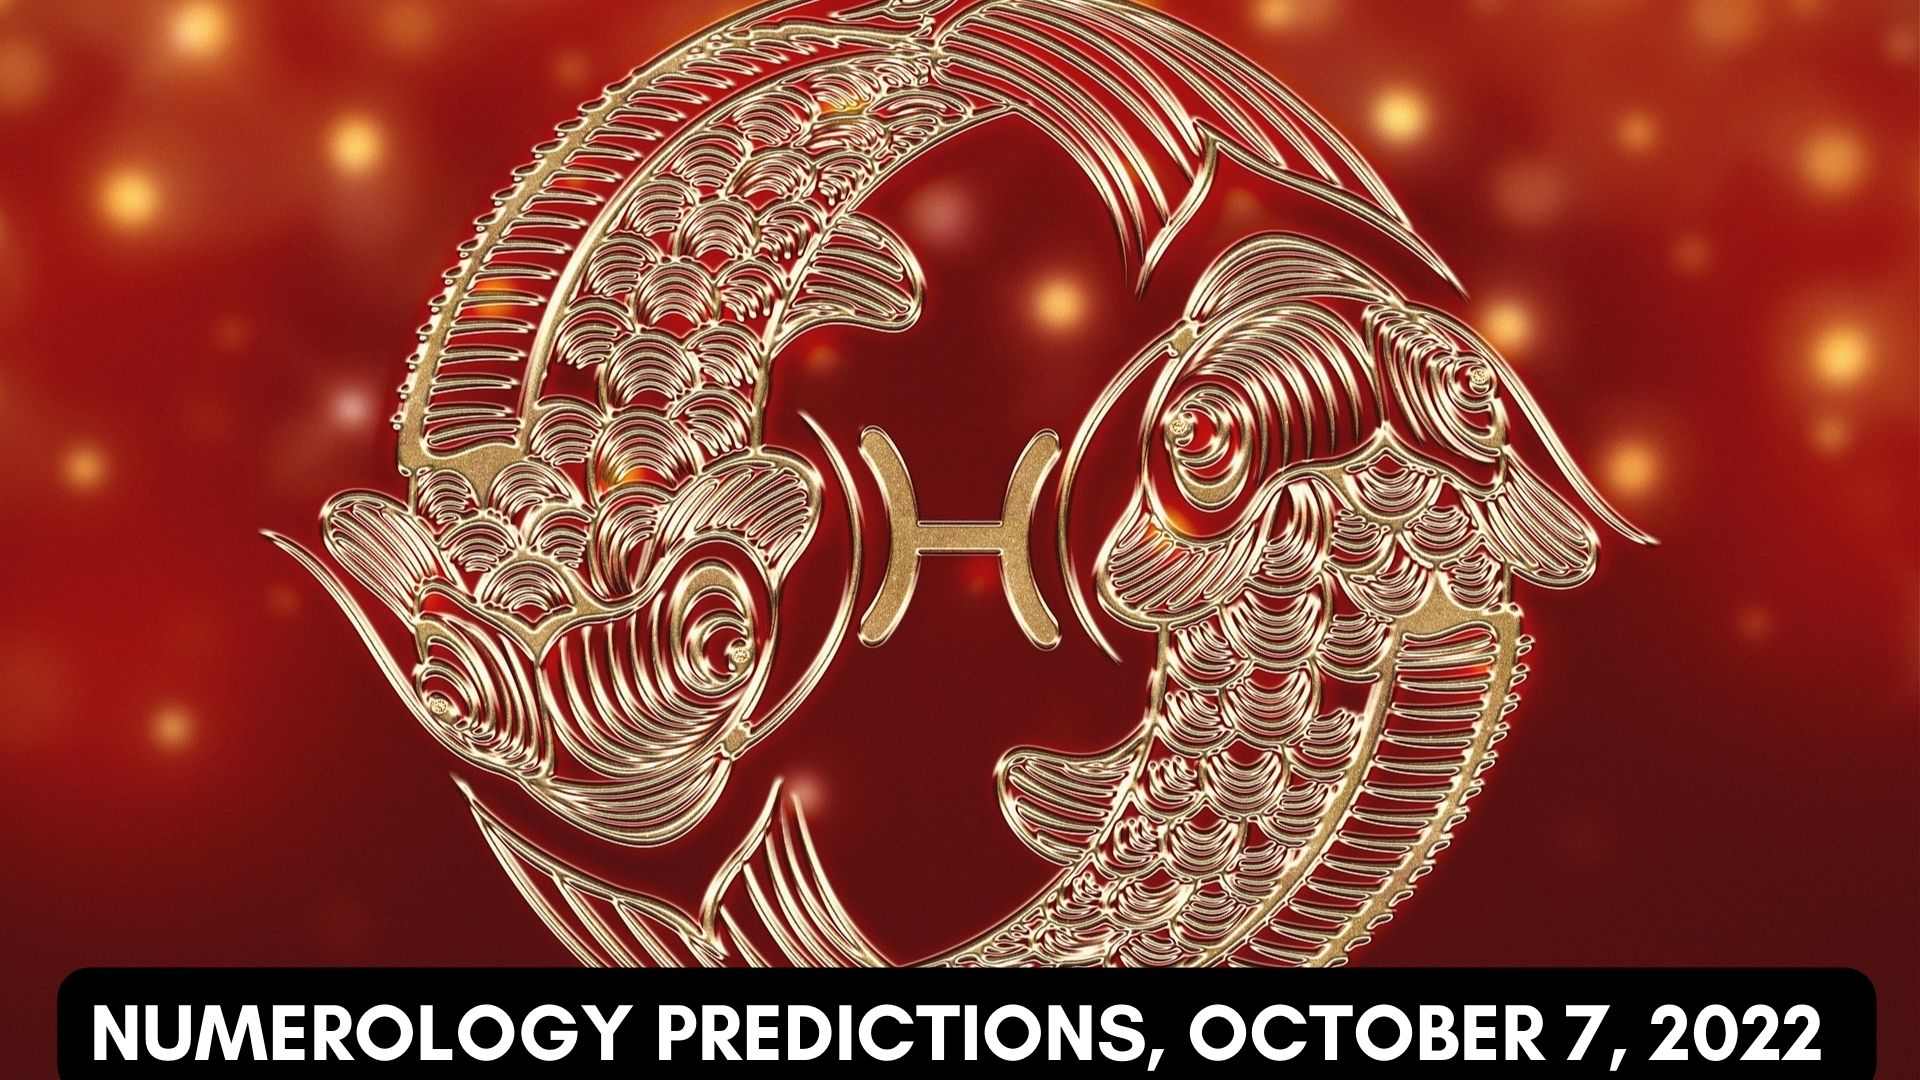 Numerology Predictions, October 7, 2022 - Check Out Your Lucky Numbers And Other Details